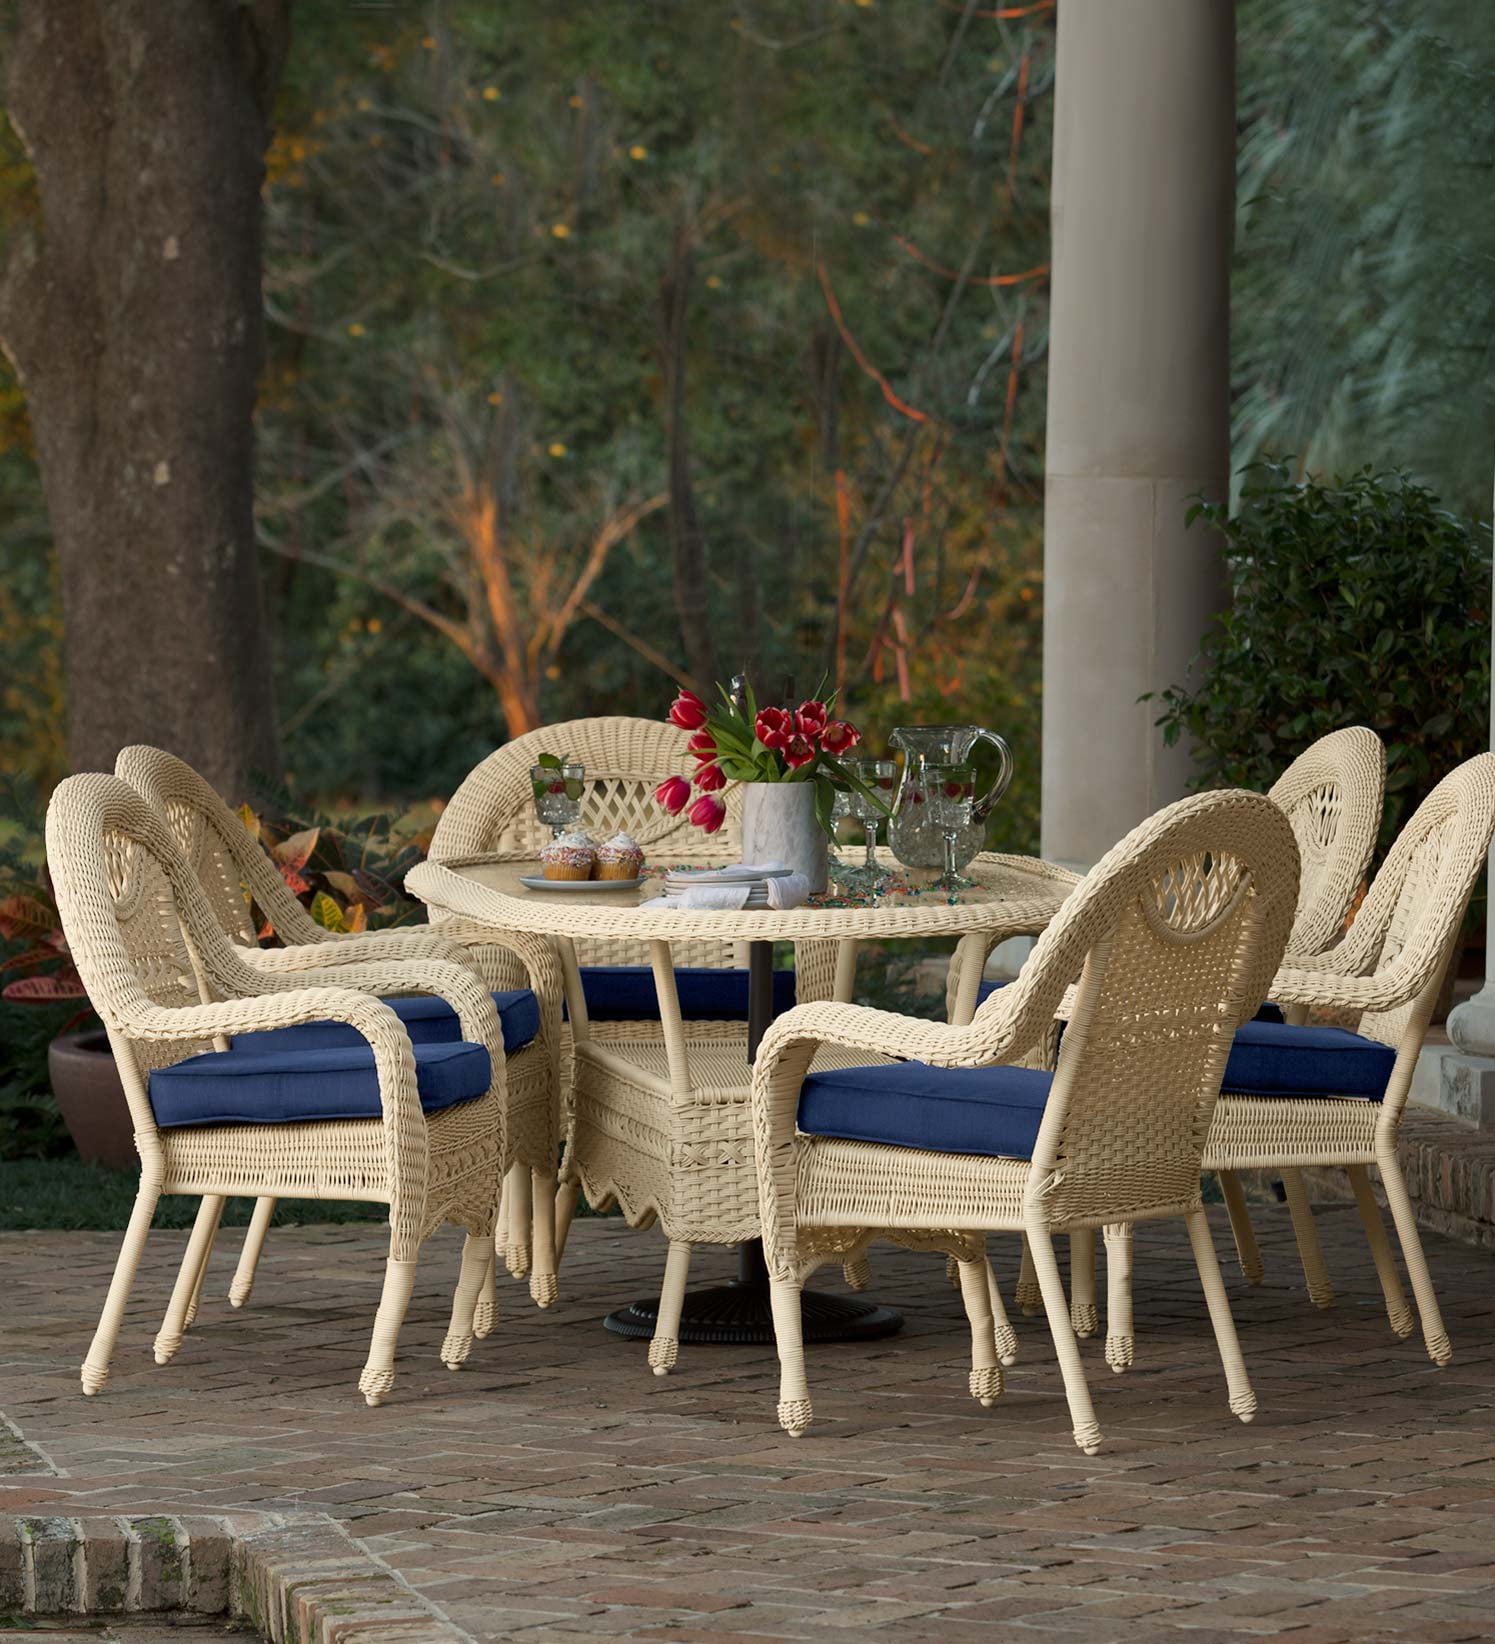 Prospect Hill Oval Outdoor Wicker Dining Table and 6 Chairs Set, Cloud